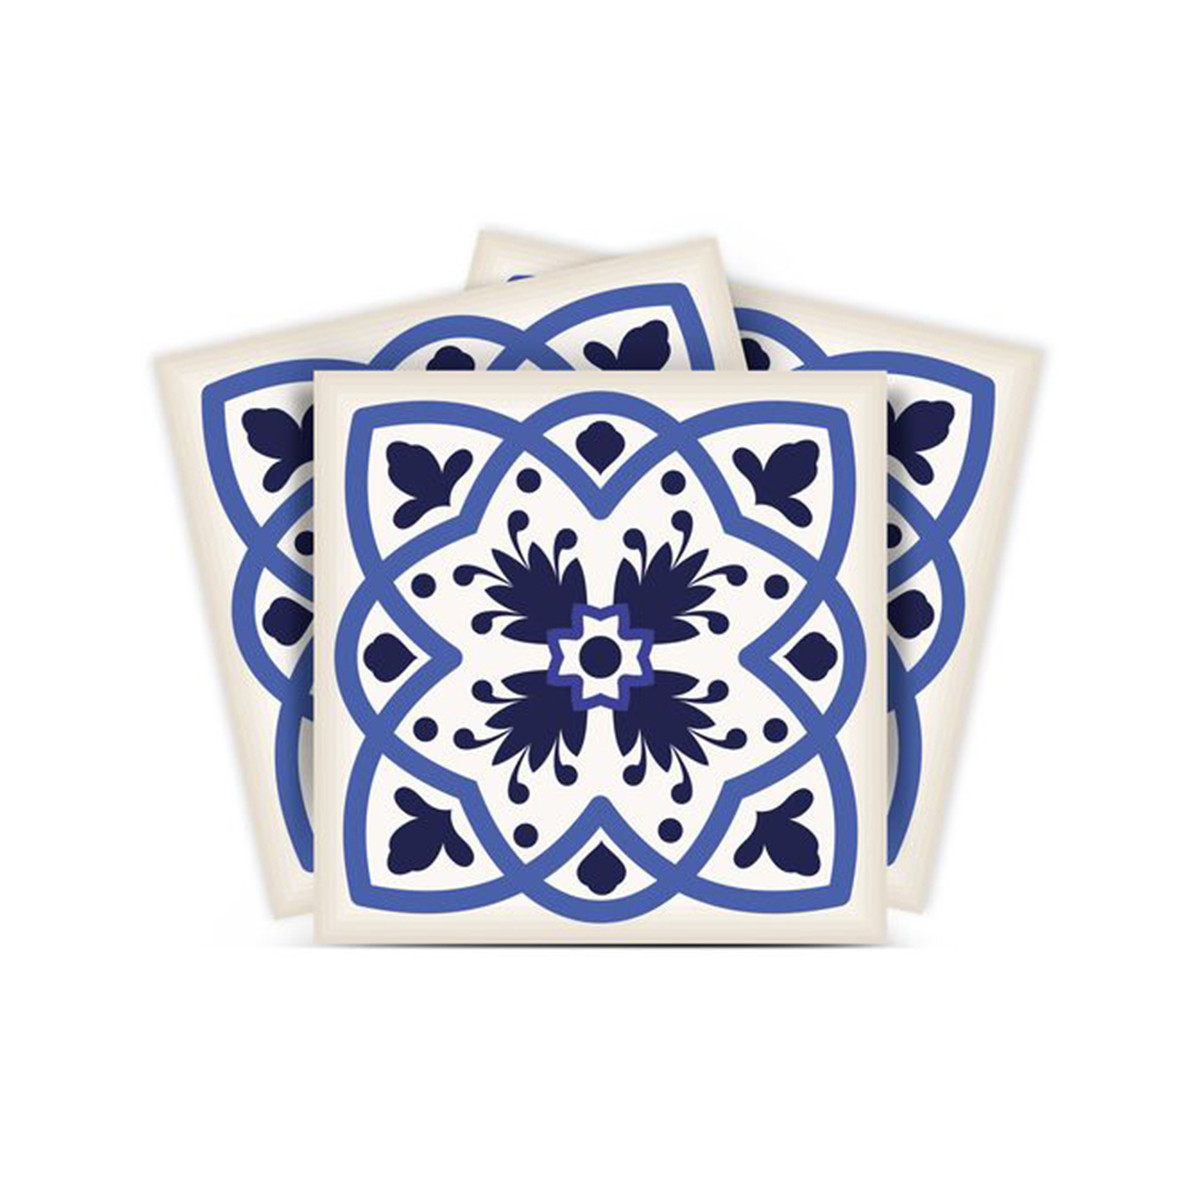 4" X 4" Blue And White Mosaic Peel And Stick Removable Tiles-399825-1